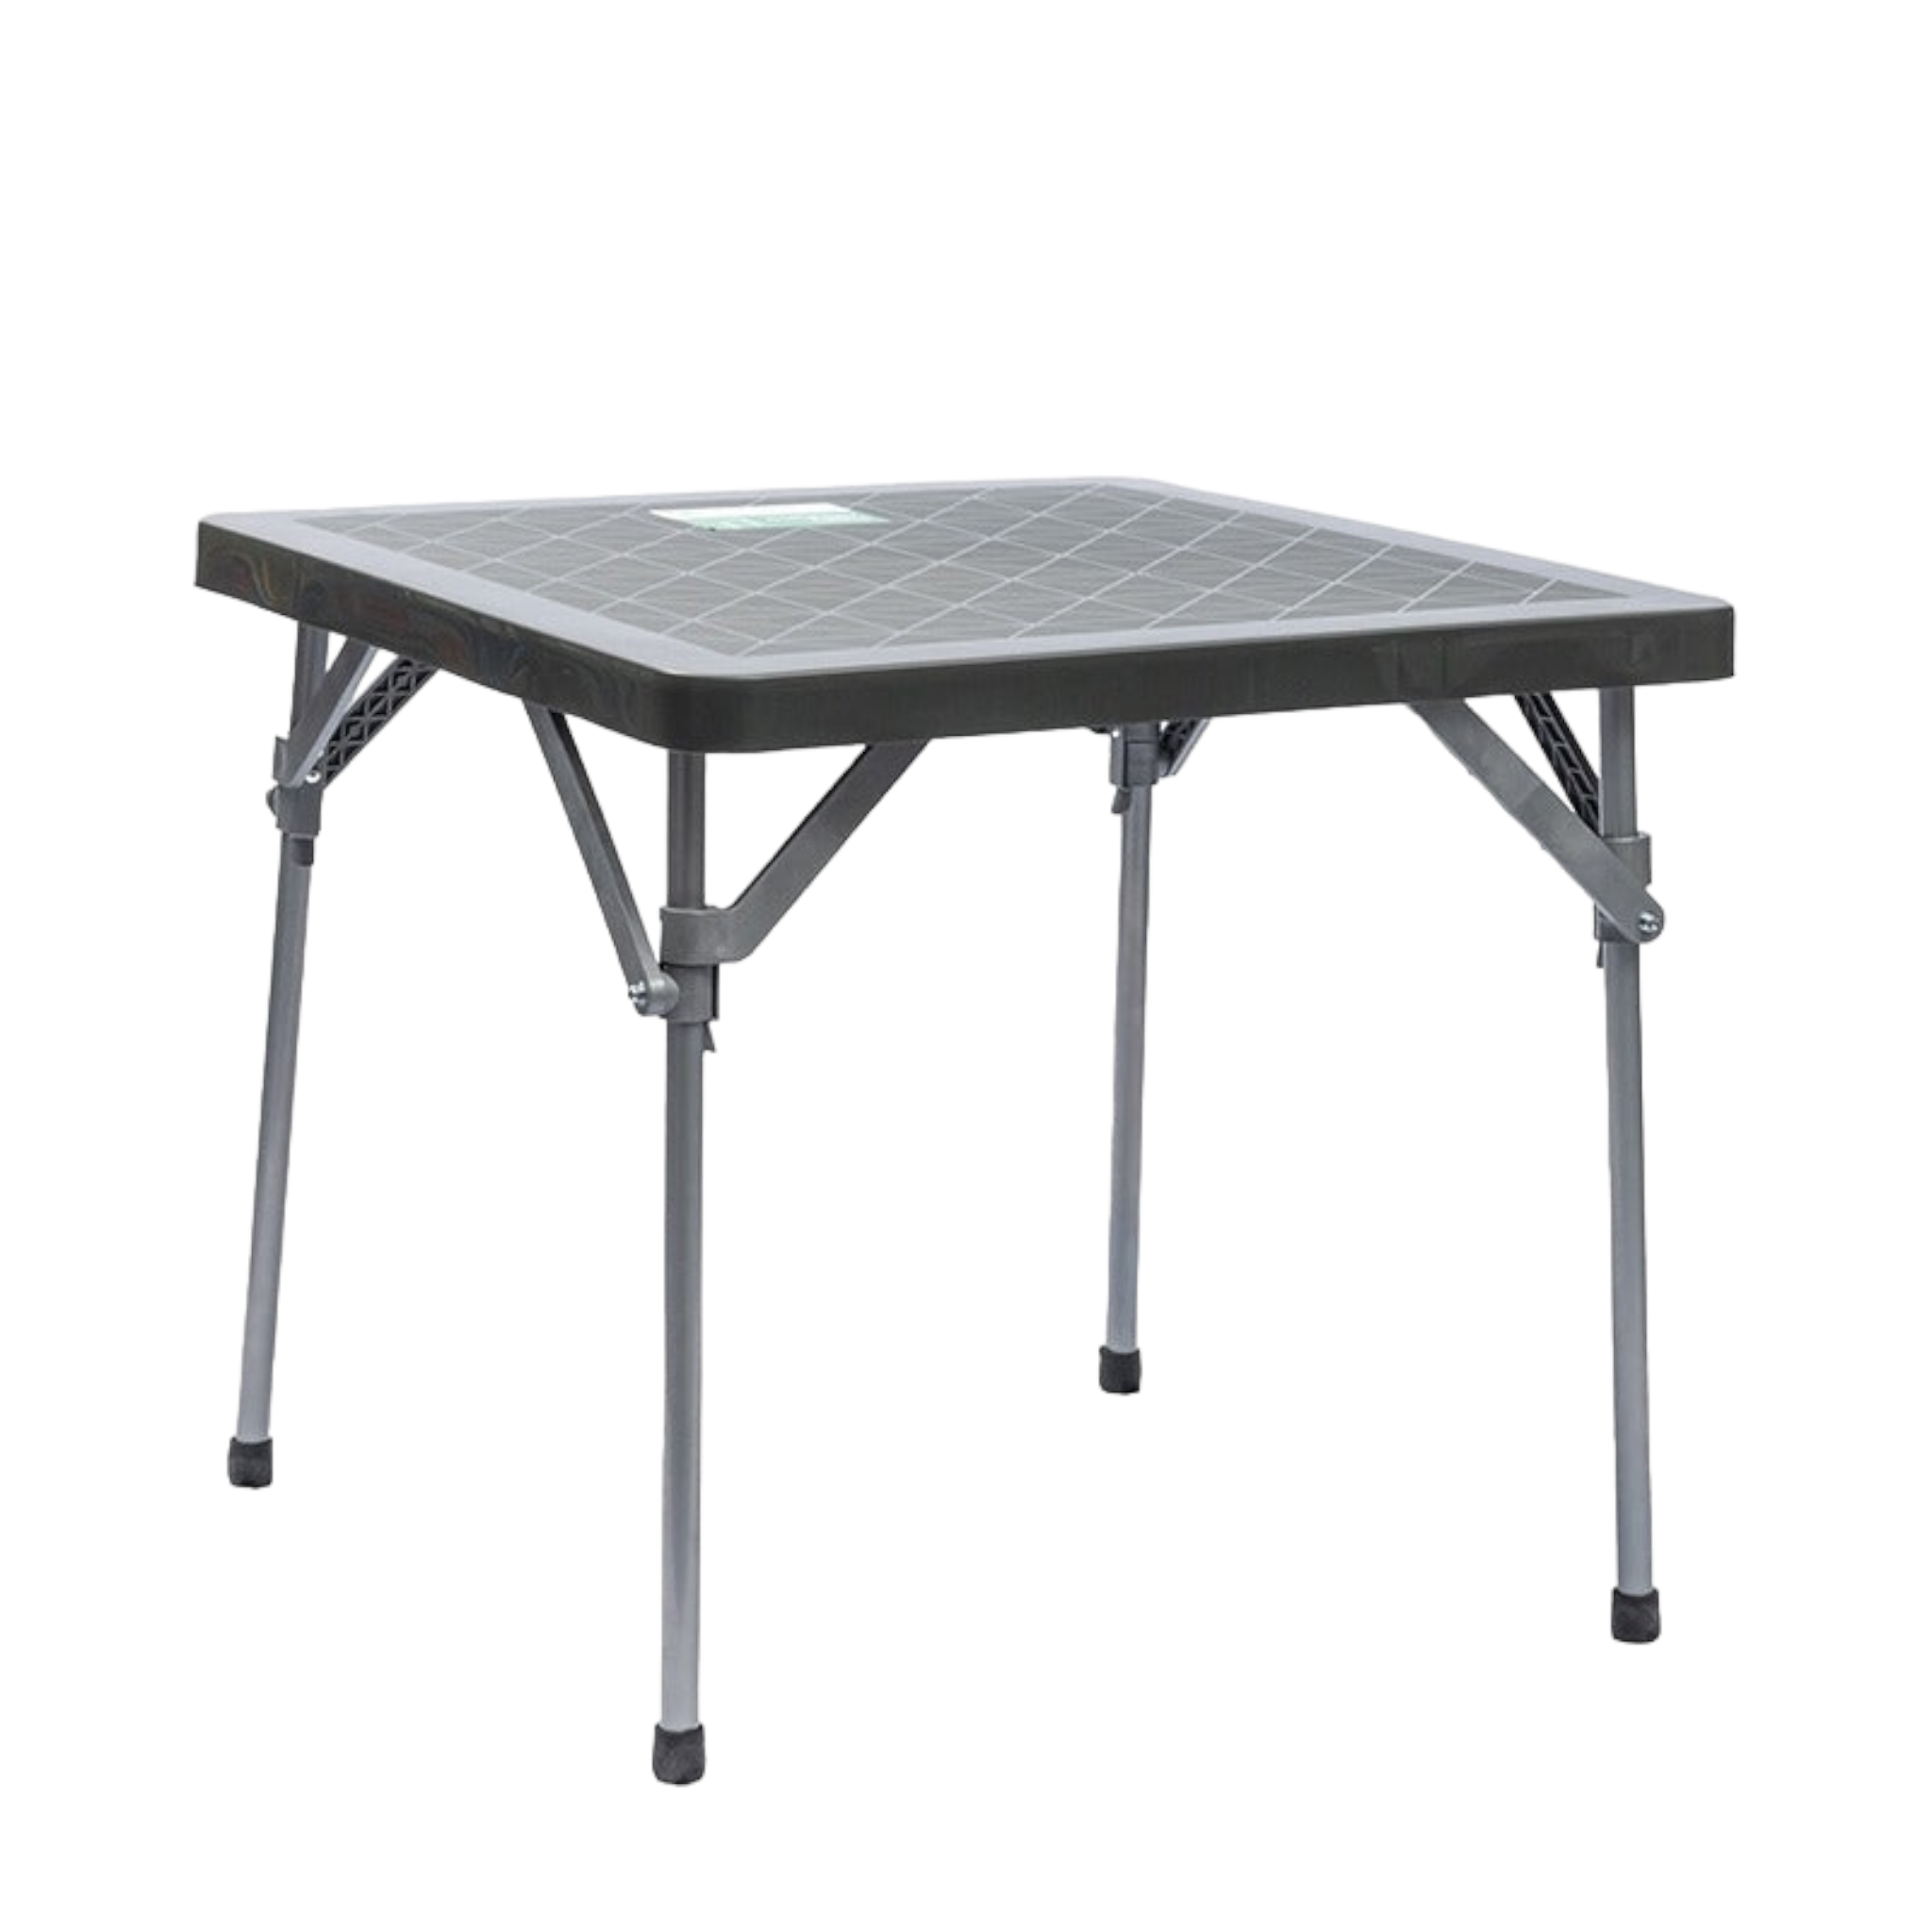 Tia Plastic Collapsible Table Black 4 Seater